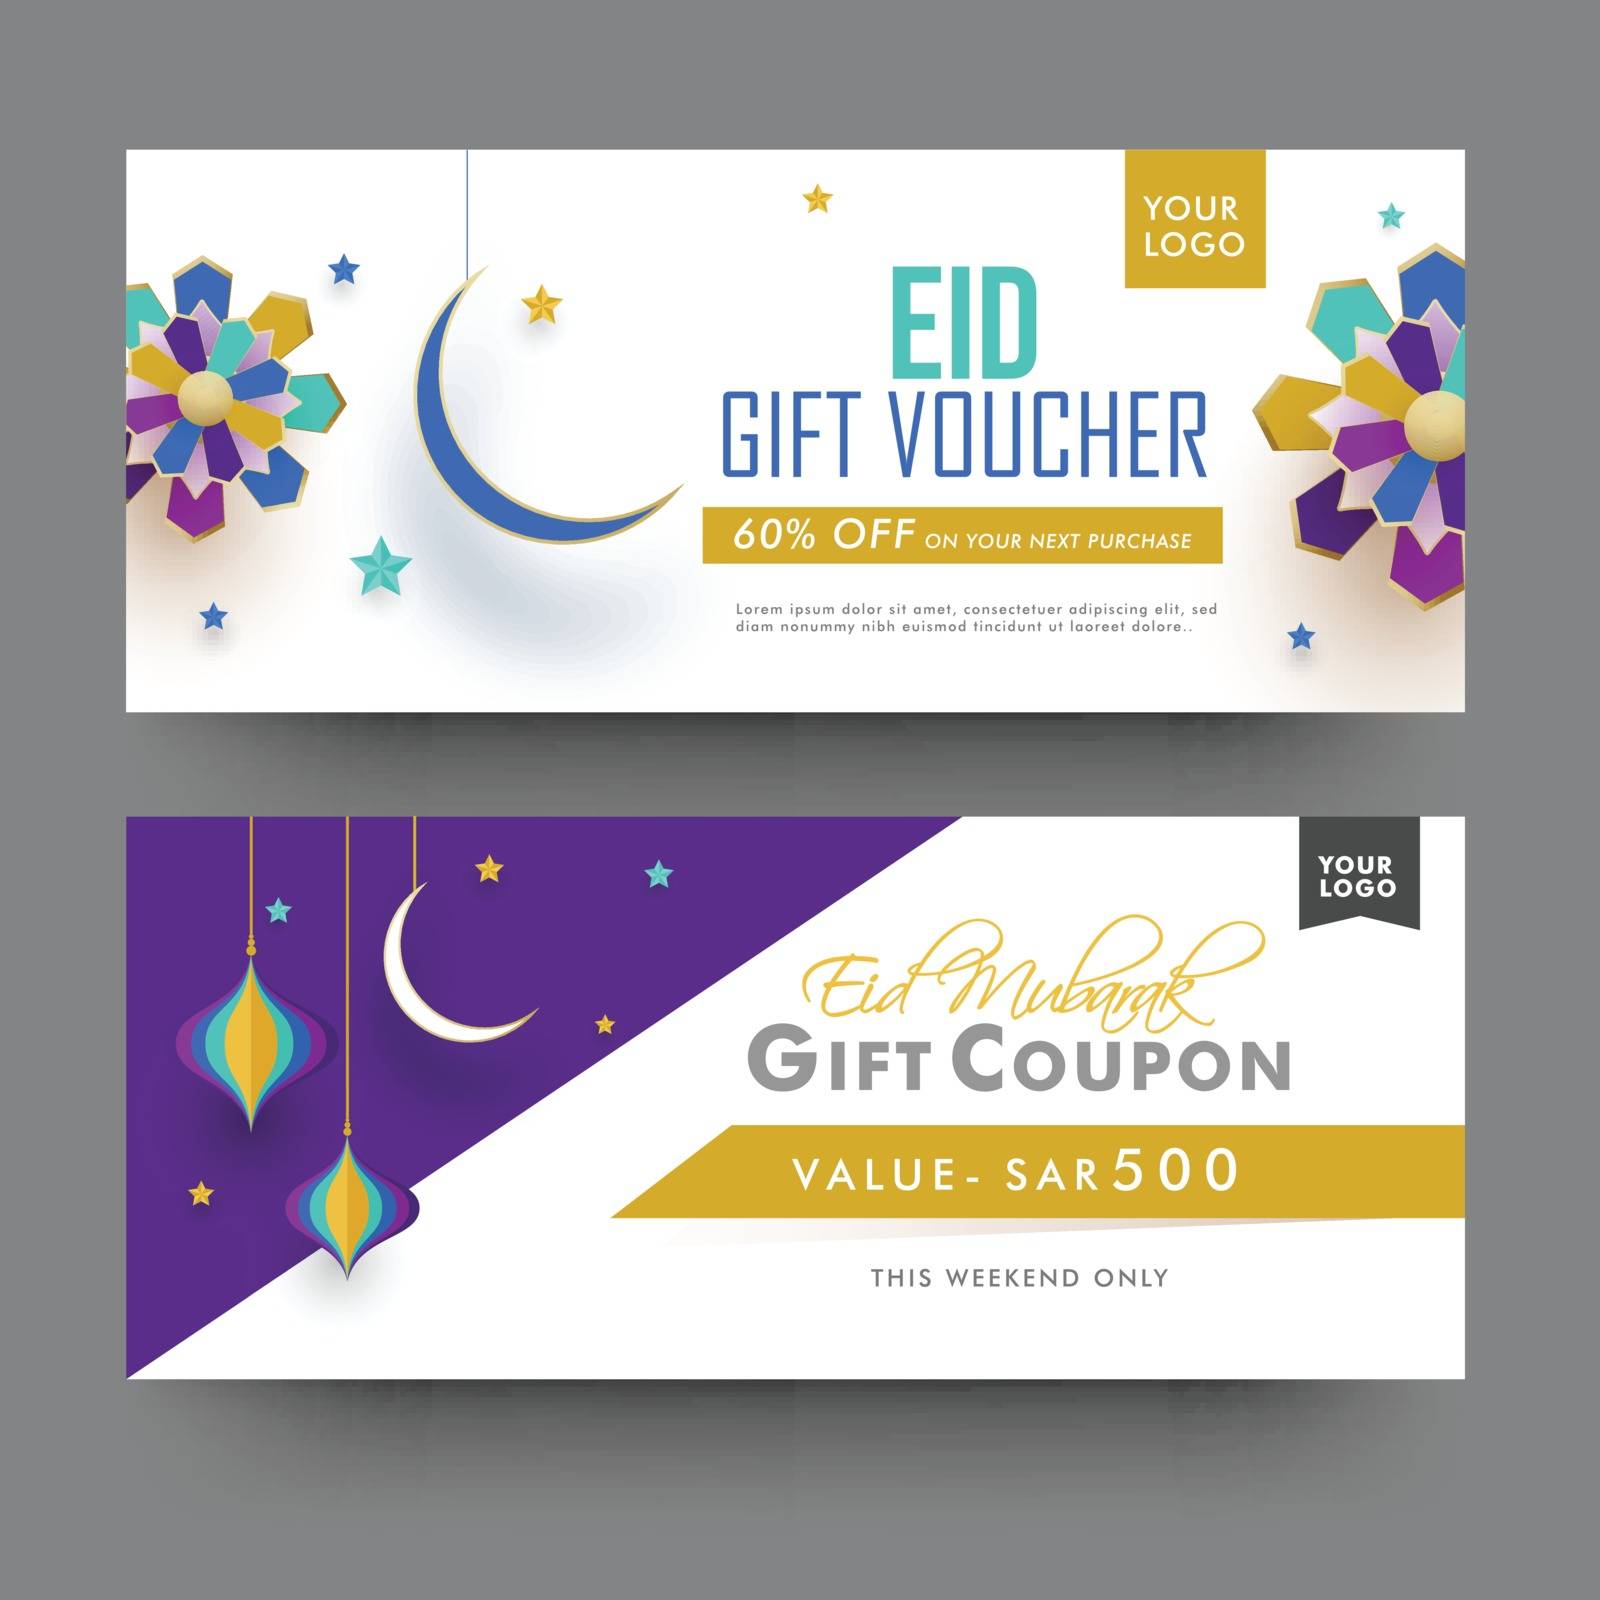 Creative Gift Voucher or Coupon template set in two different styles, Stylish colorful typography background for Eid Mubarak Festival celebration.